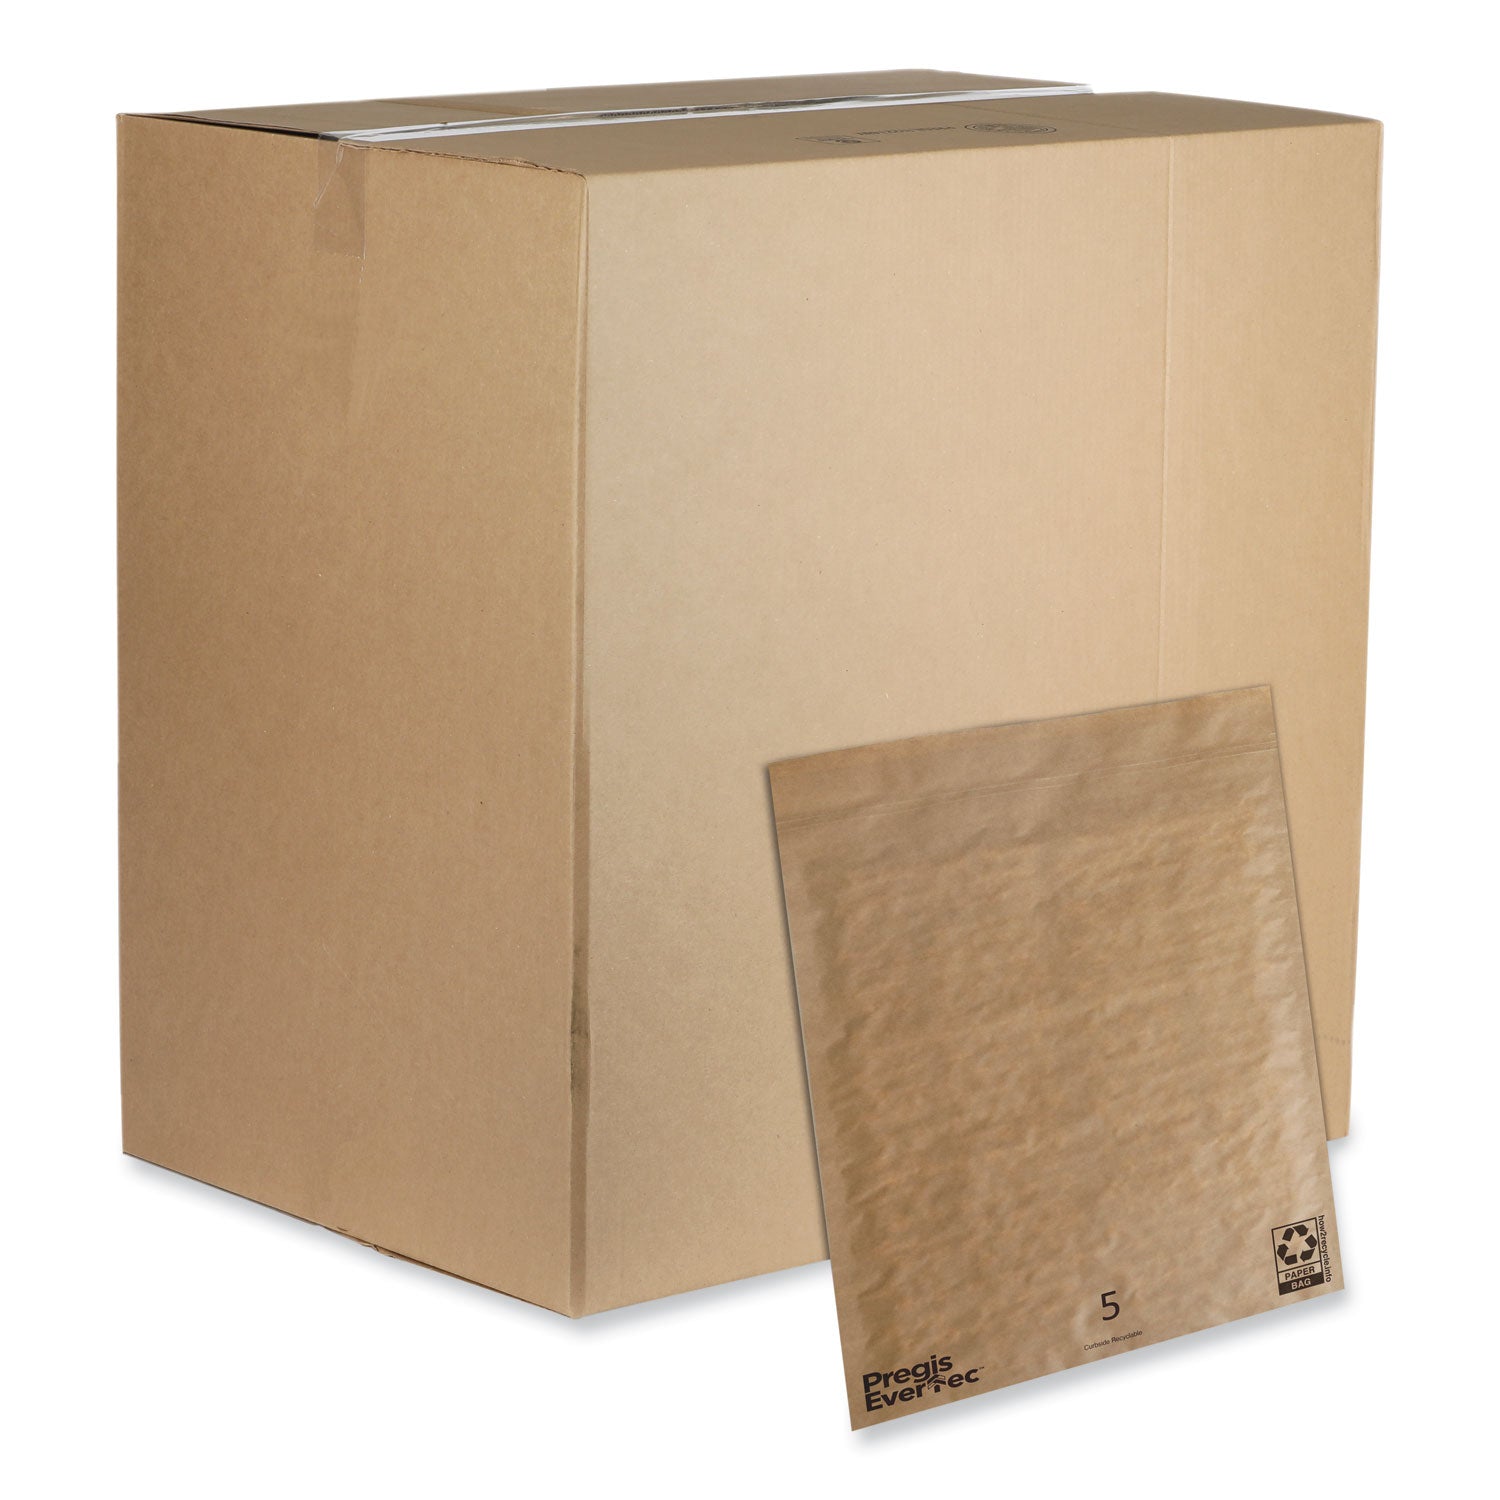 evertec-curbside-recyclable-padded-mailer-#5-kraft-paper-self-adhesive-closure-12-x-15-brown-100-carton_pgs4083816 - 1